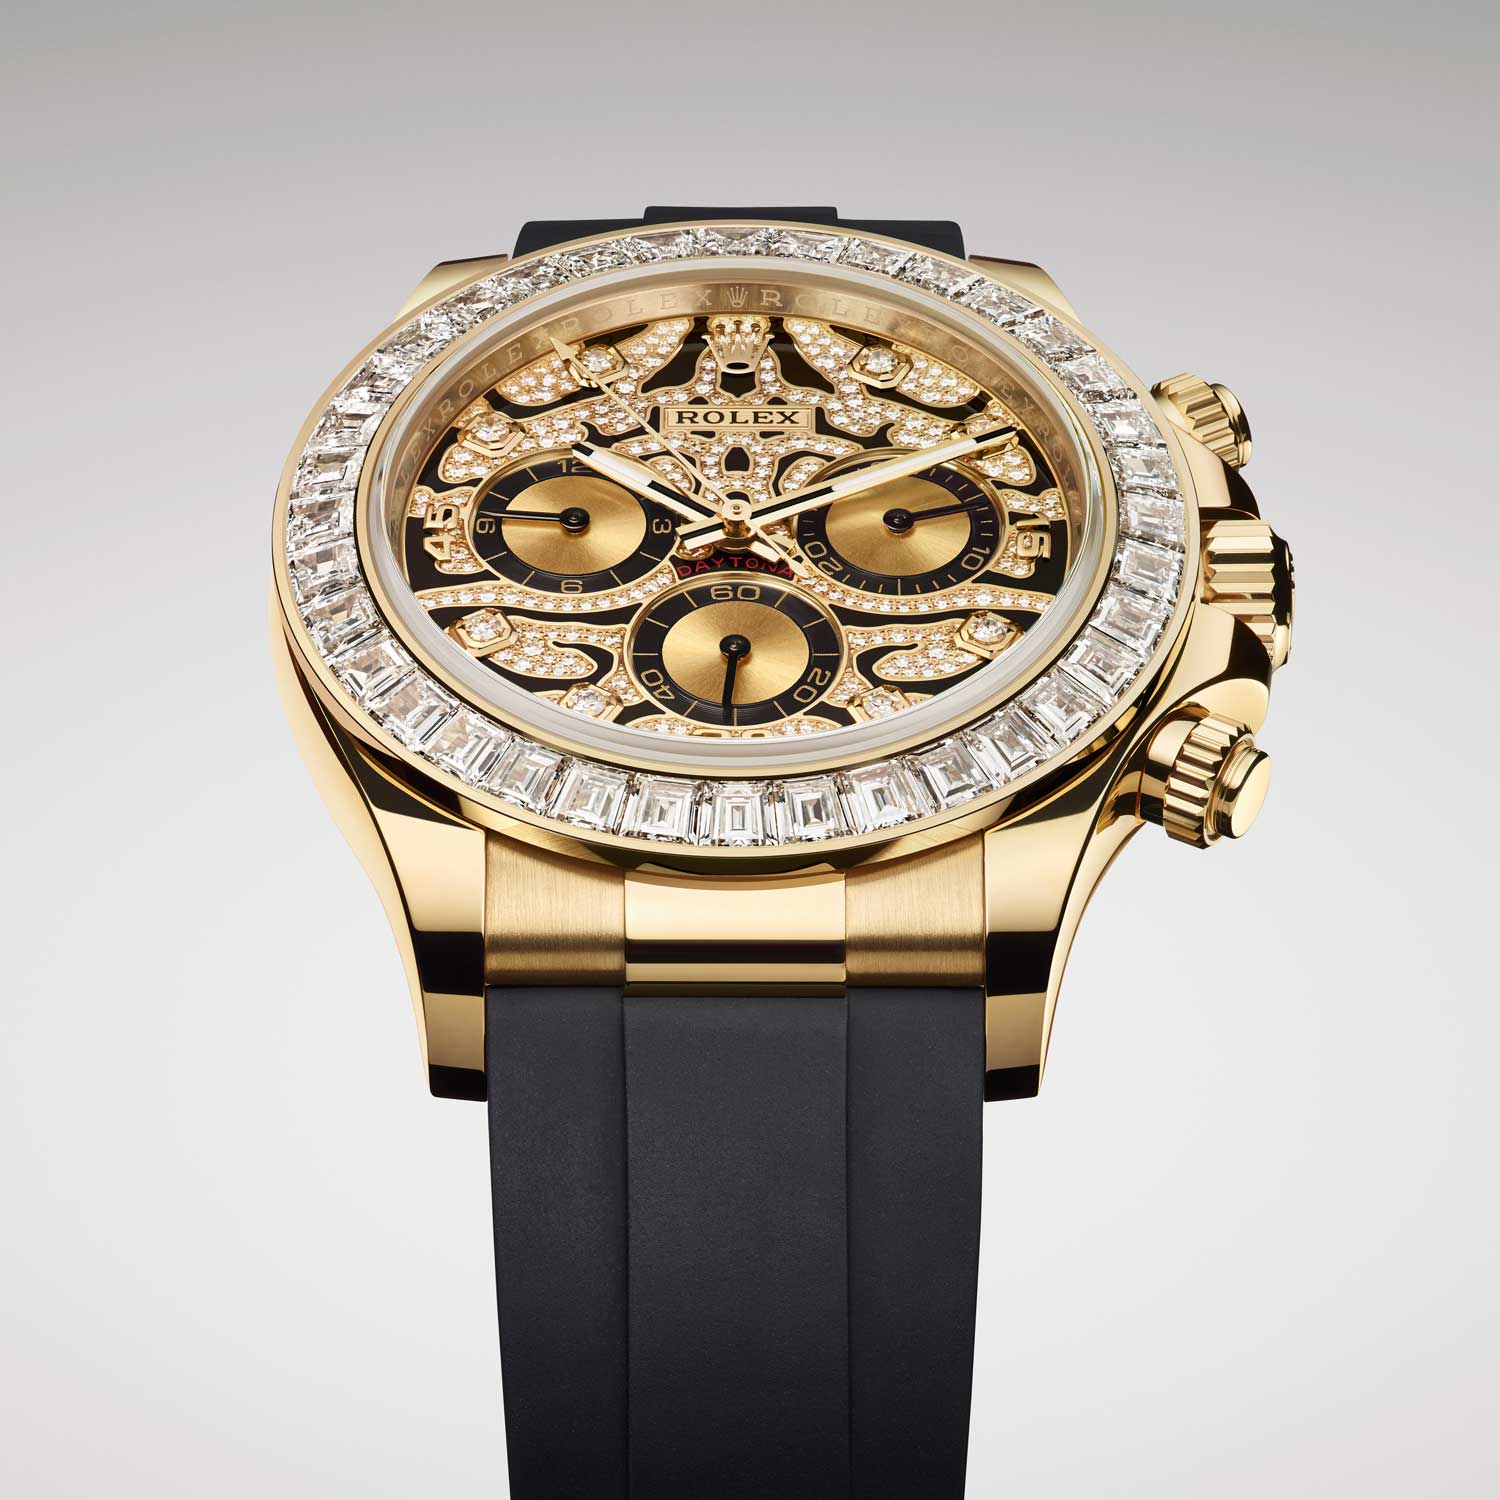 No watches over 35 years old will be included in the Rolex CPO offer, so you might see an “Eye of the Tiger” Daytona...